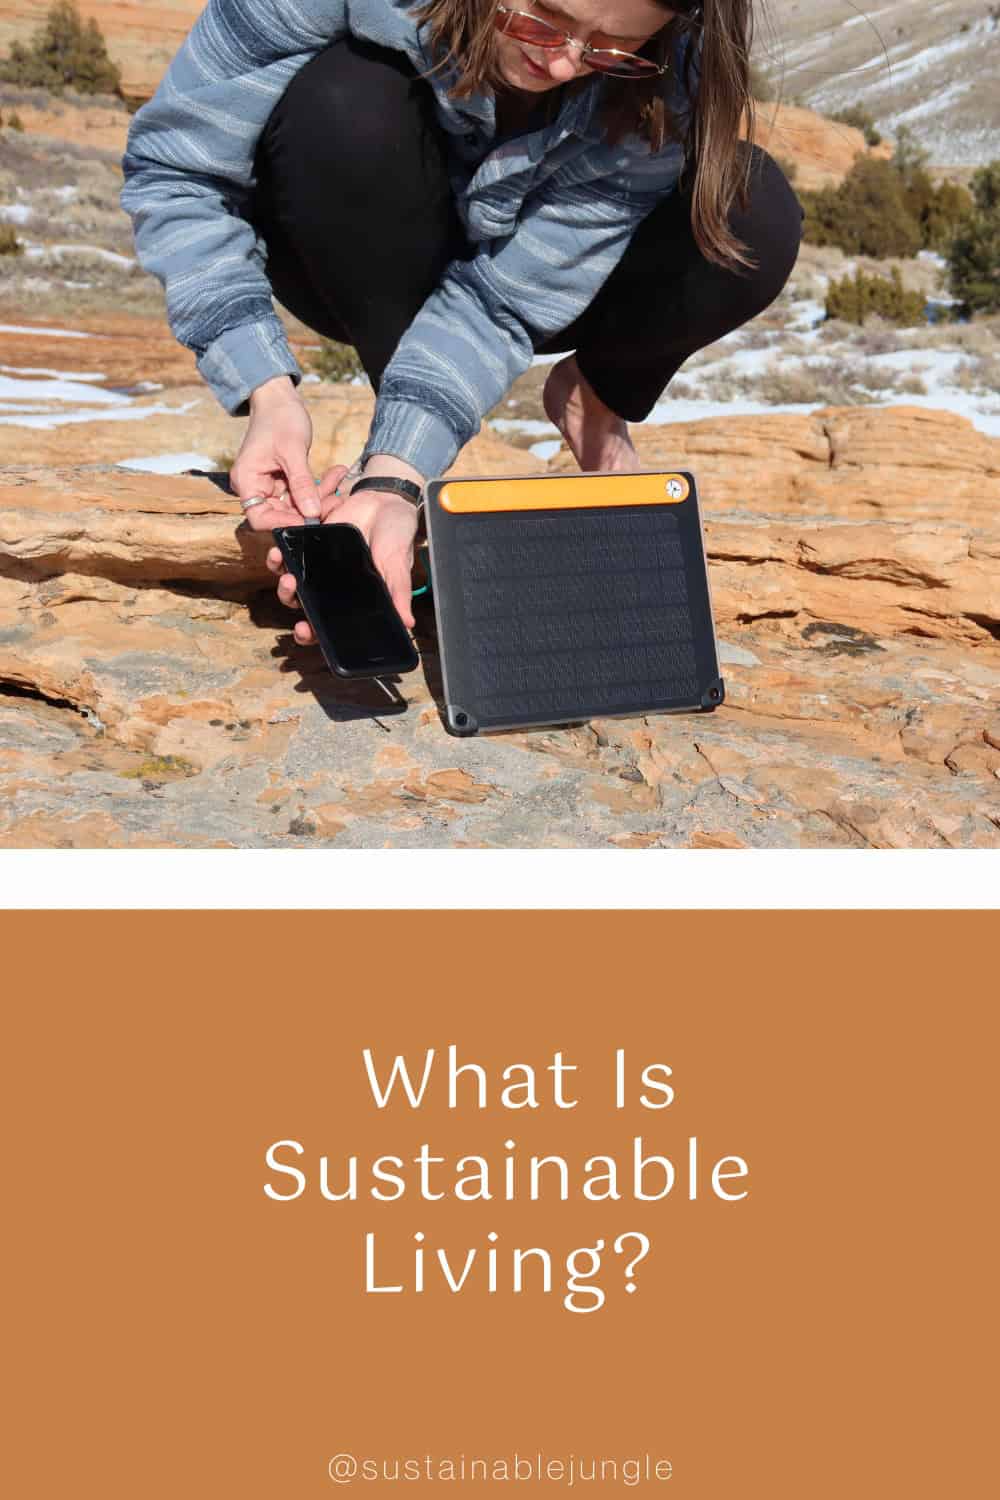 What Is Sustainable Living? Image by Sustainable Jungle #whatissustainableliving #sustainablelivingmeaning #sustainablelivingdefinition #sustainablelivingpractices #definitionofsustainableliving #sustainablejungle